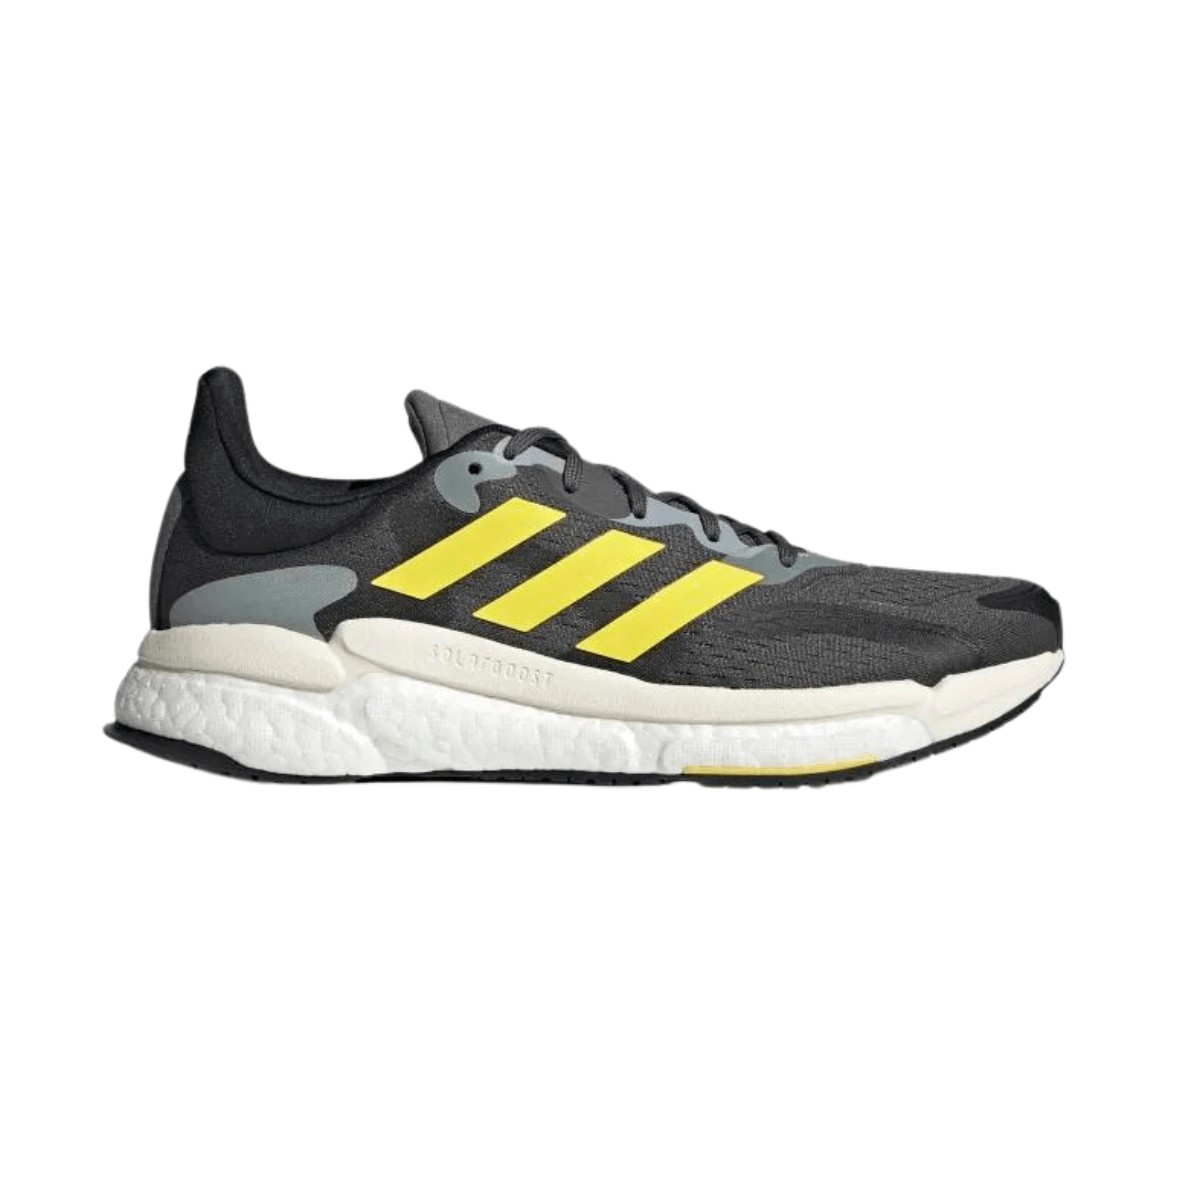 Buy Adidas Solar Boost 4 Black Yellow Shoes The Best Price